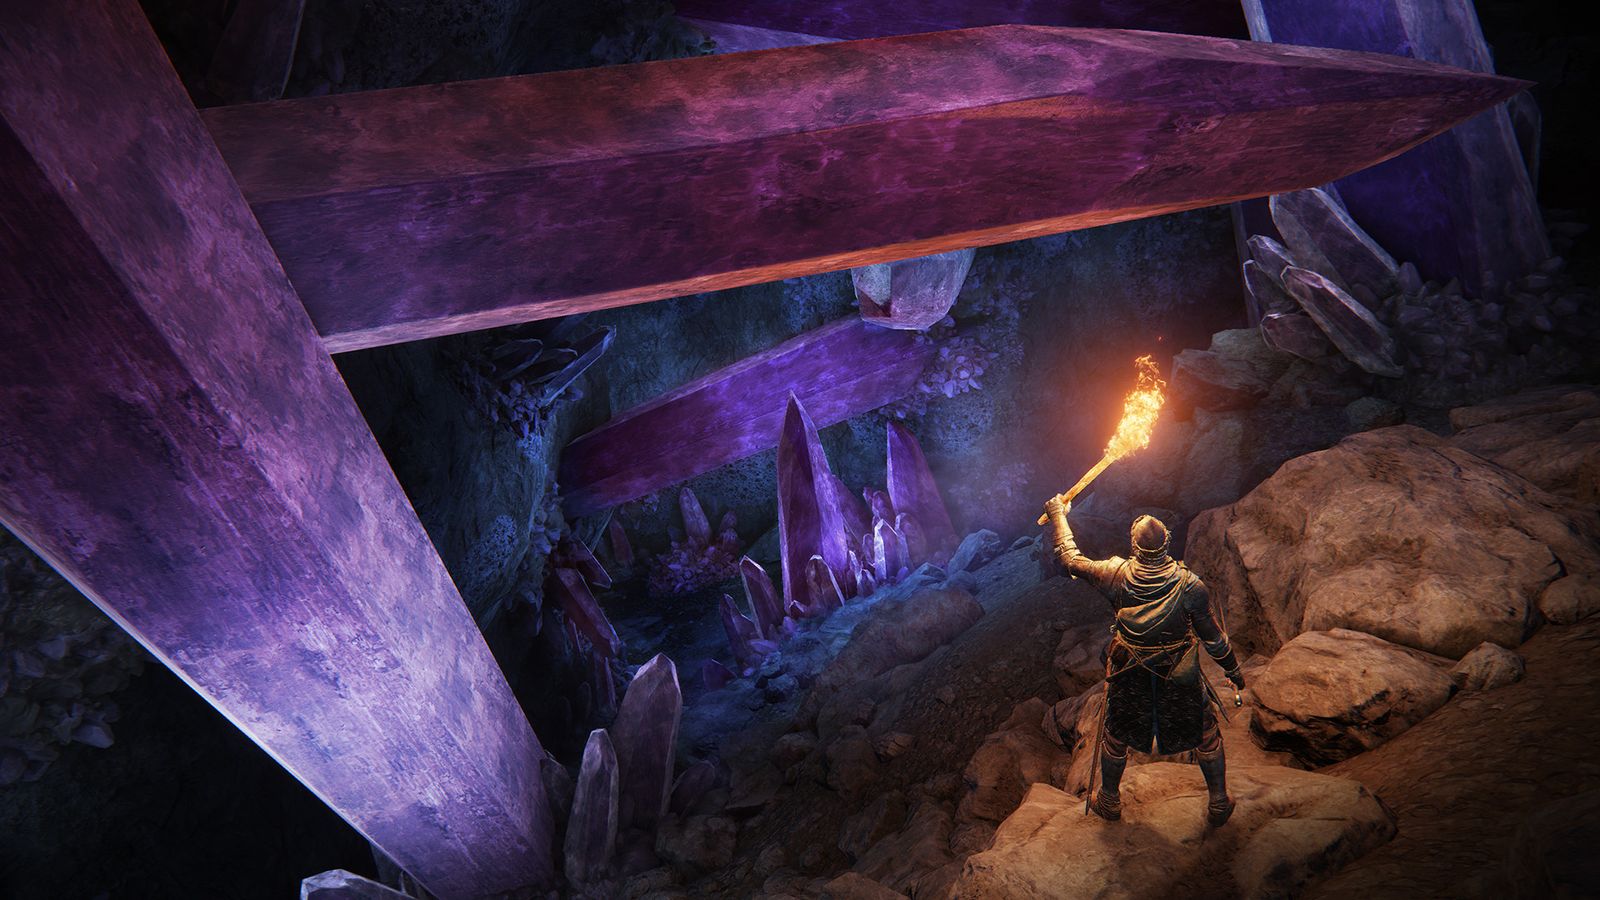 A player holds up a torch, illuminating a cave filled with giant purple crystals